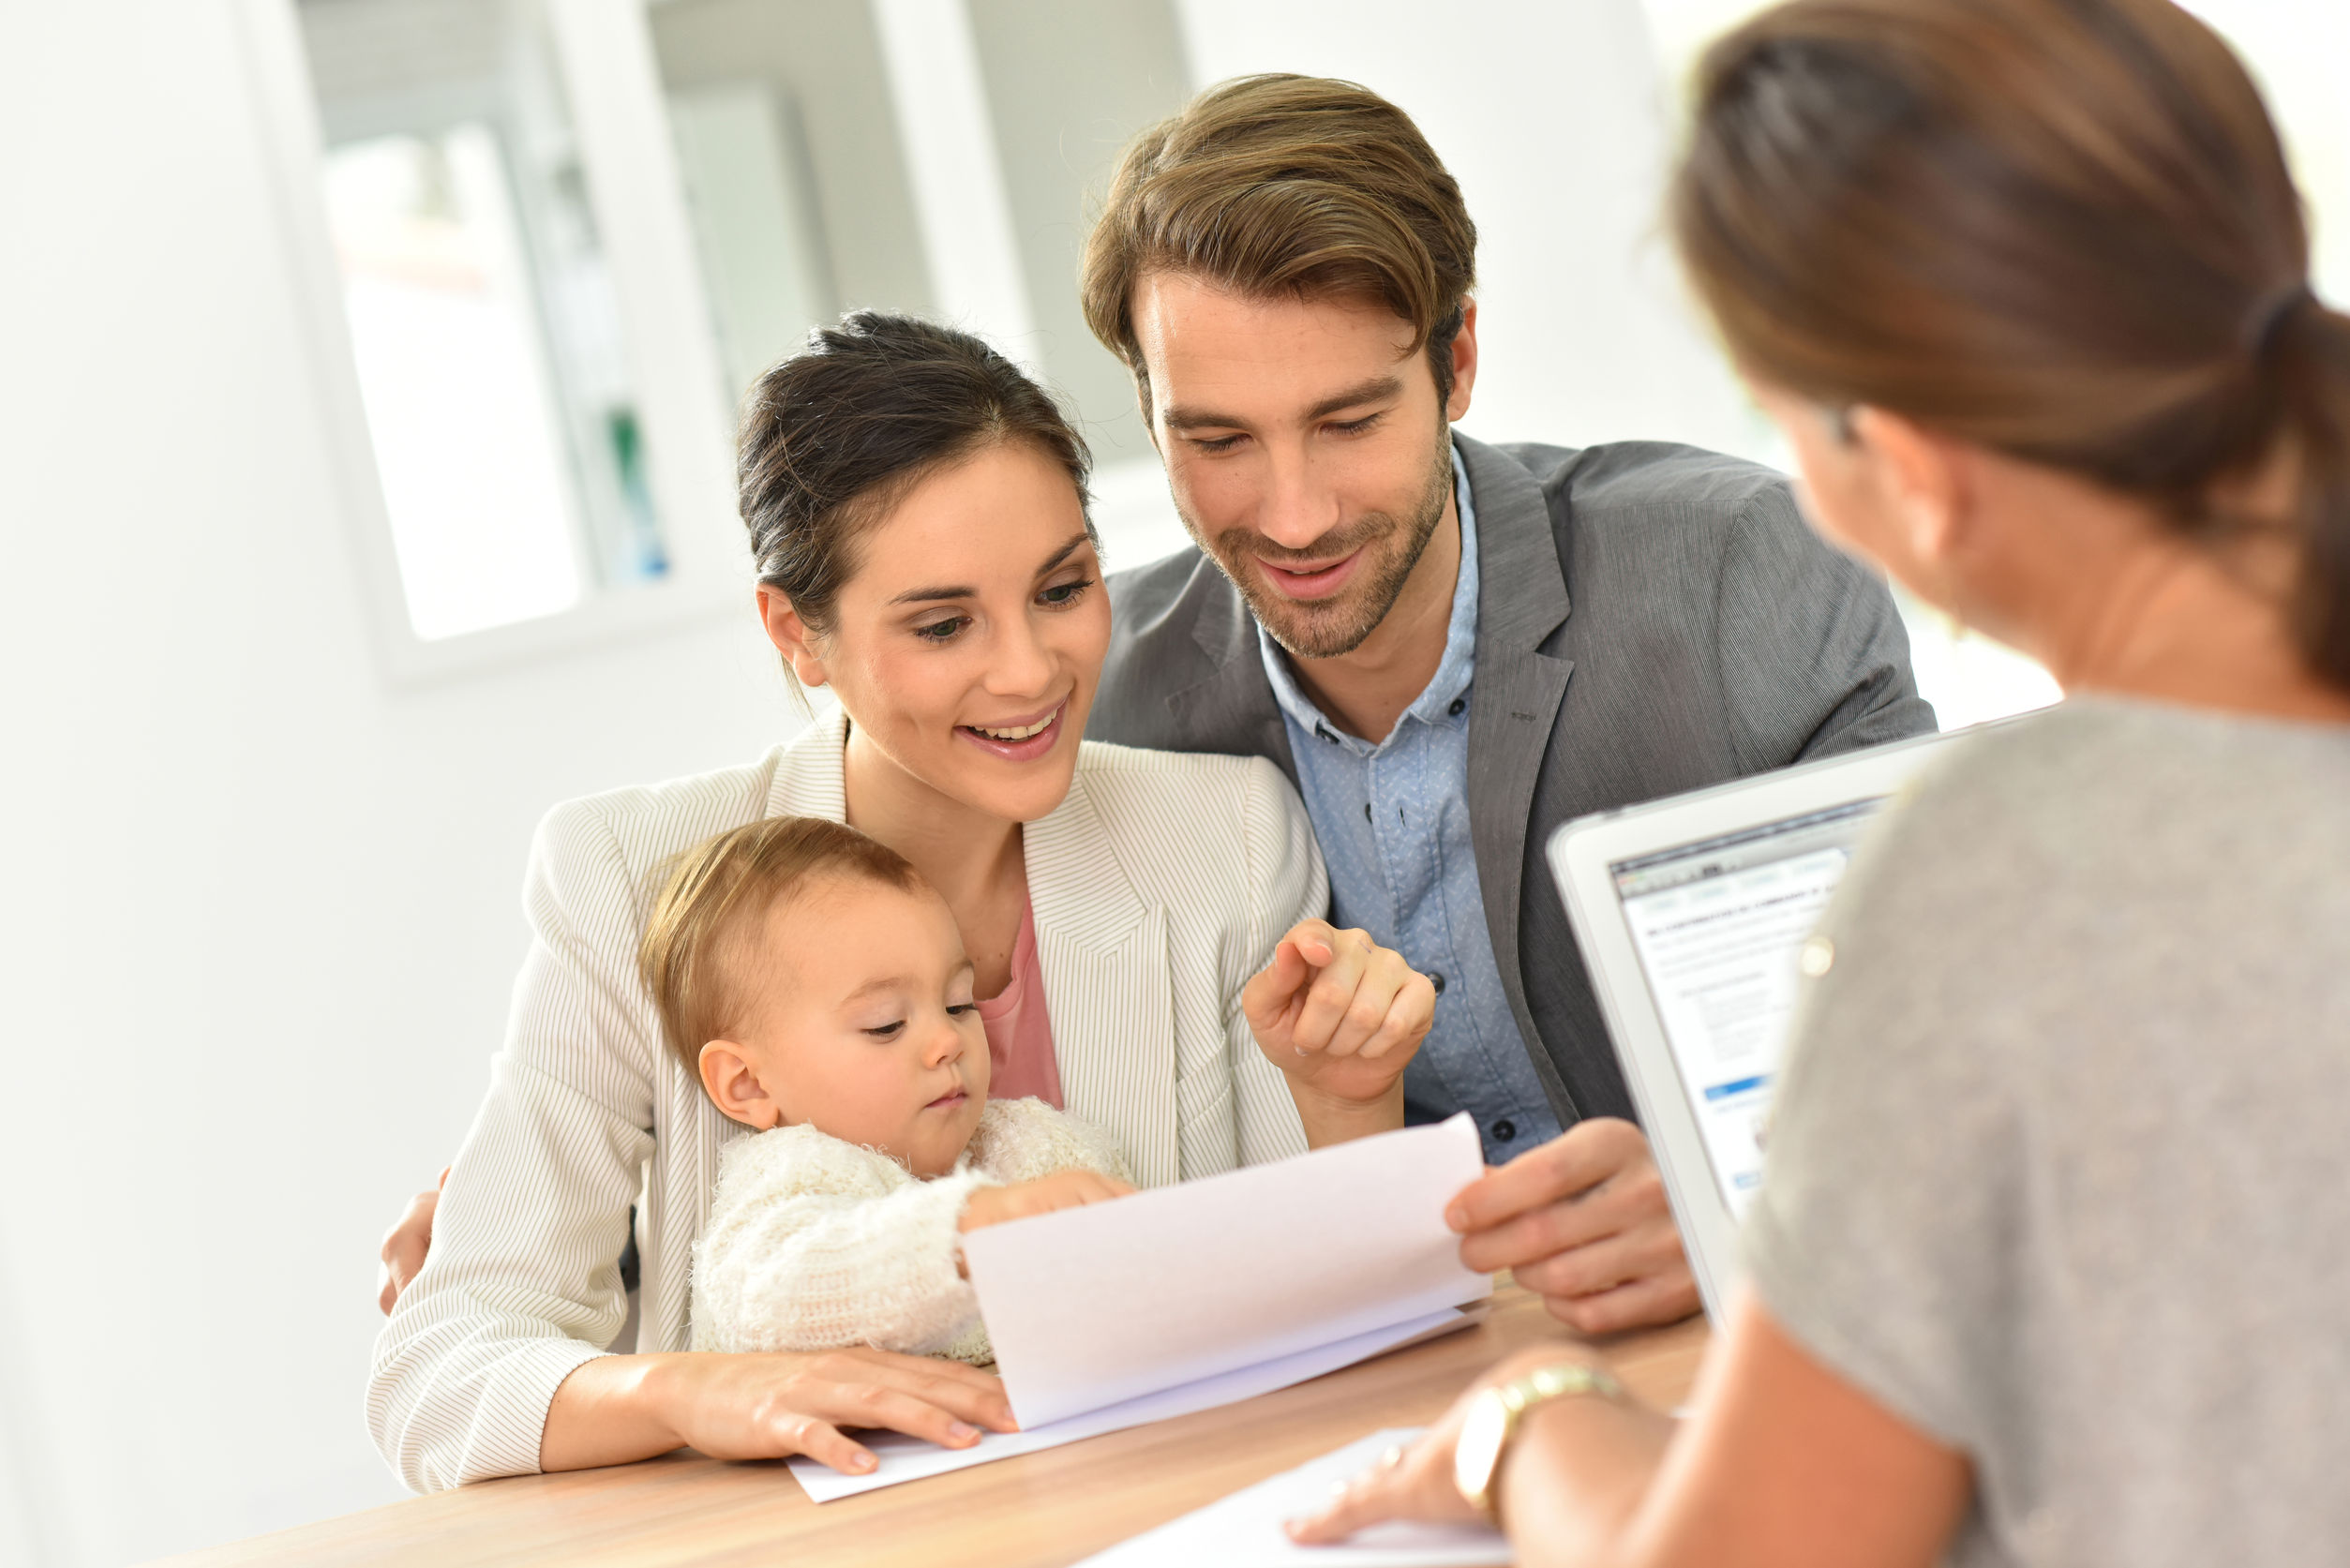 family meeting real-estate agent for house investment|emotional businesswoman gesturing during meeting at office|business people meeting and using digital tablet